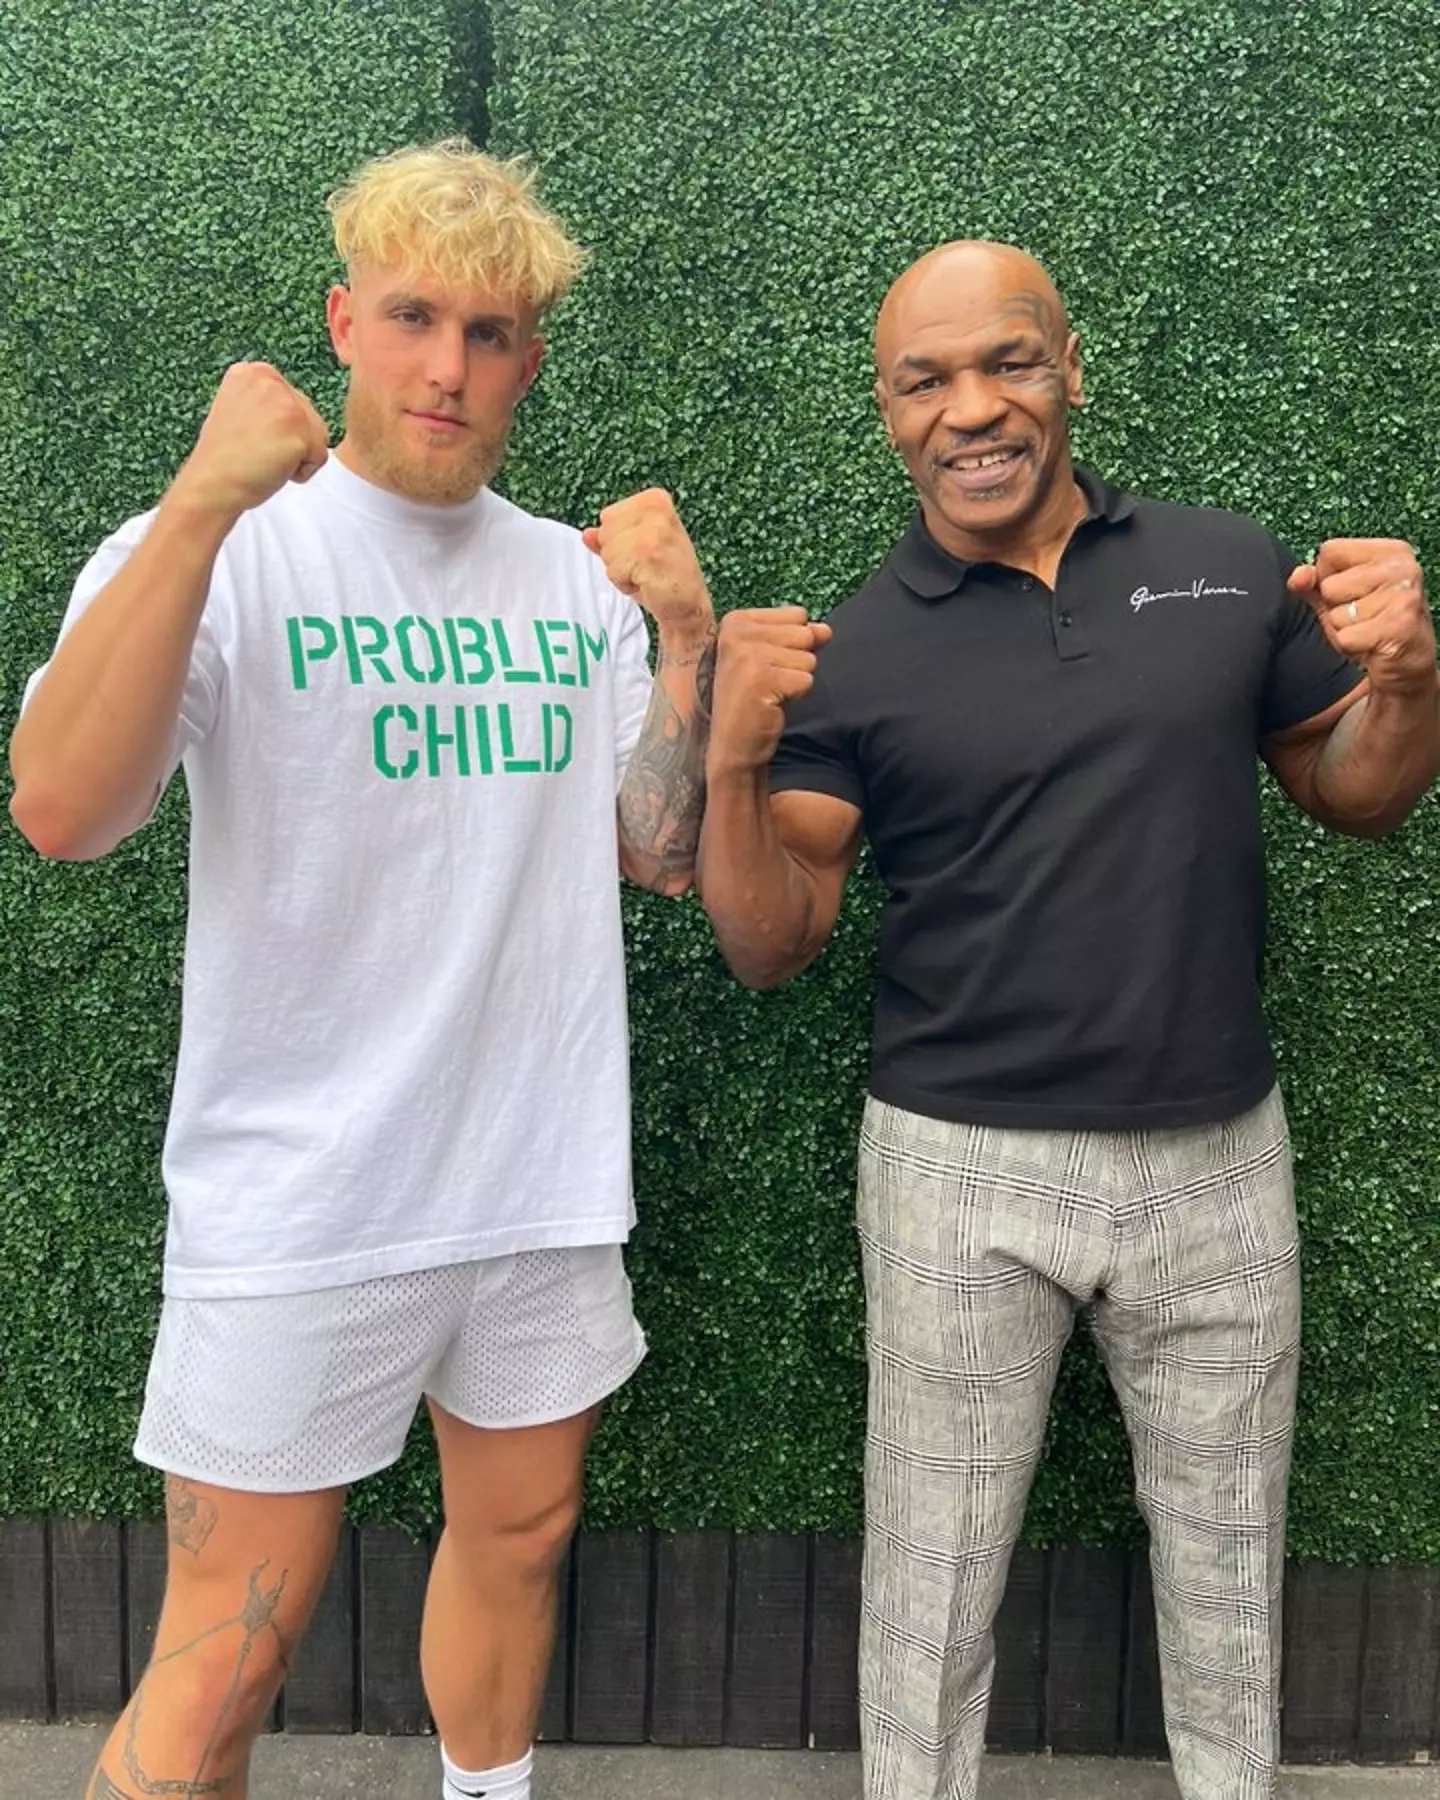 Mike Tyson said it would take a lot of cash to fight Jake Paul.